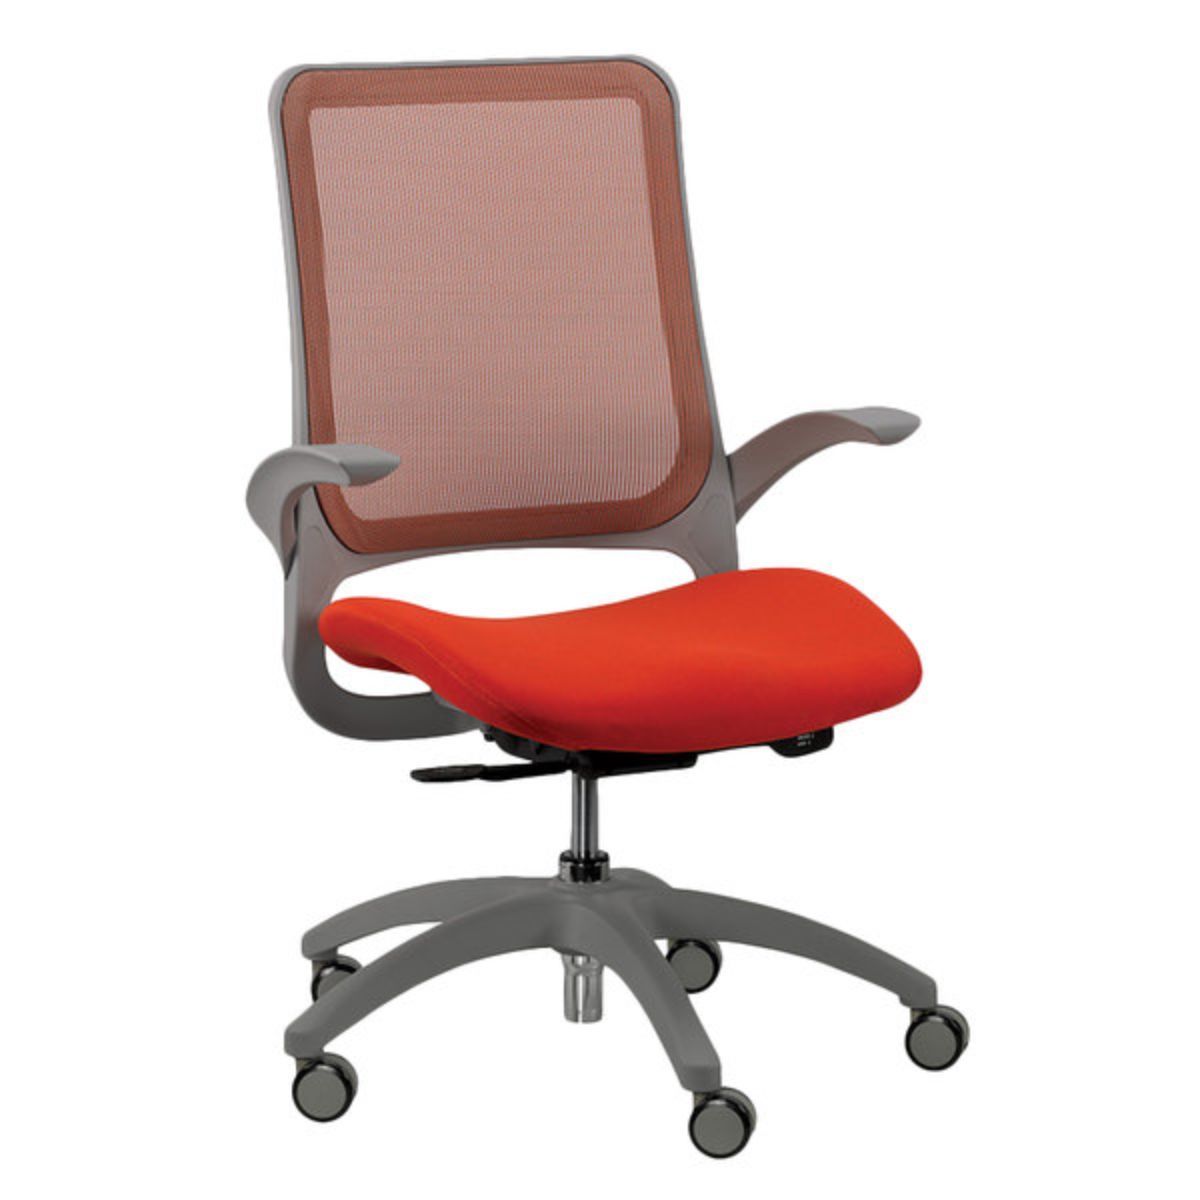 Orange and Gray Adjustable Swivel Mesh Rolling Office Chair-372407-1